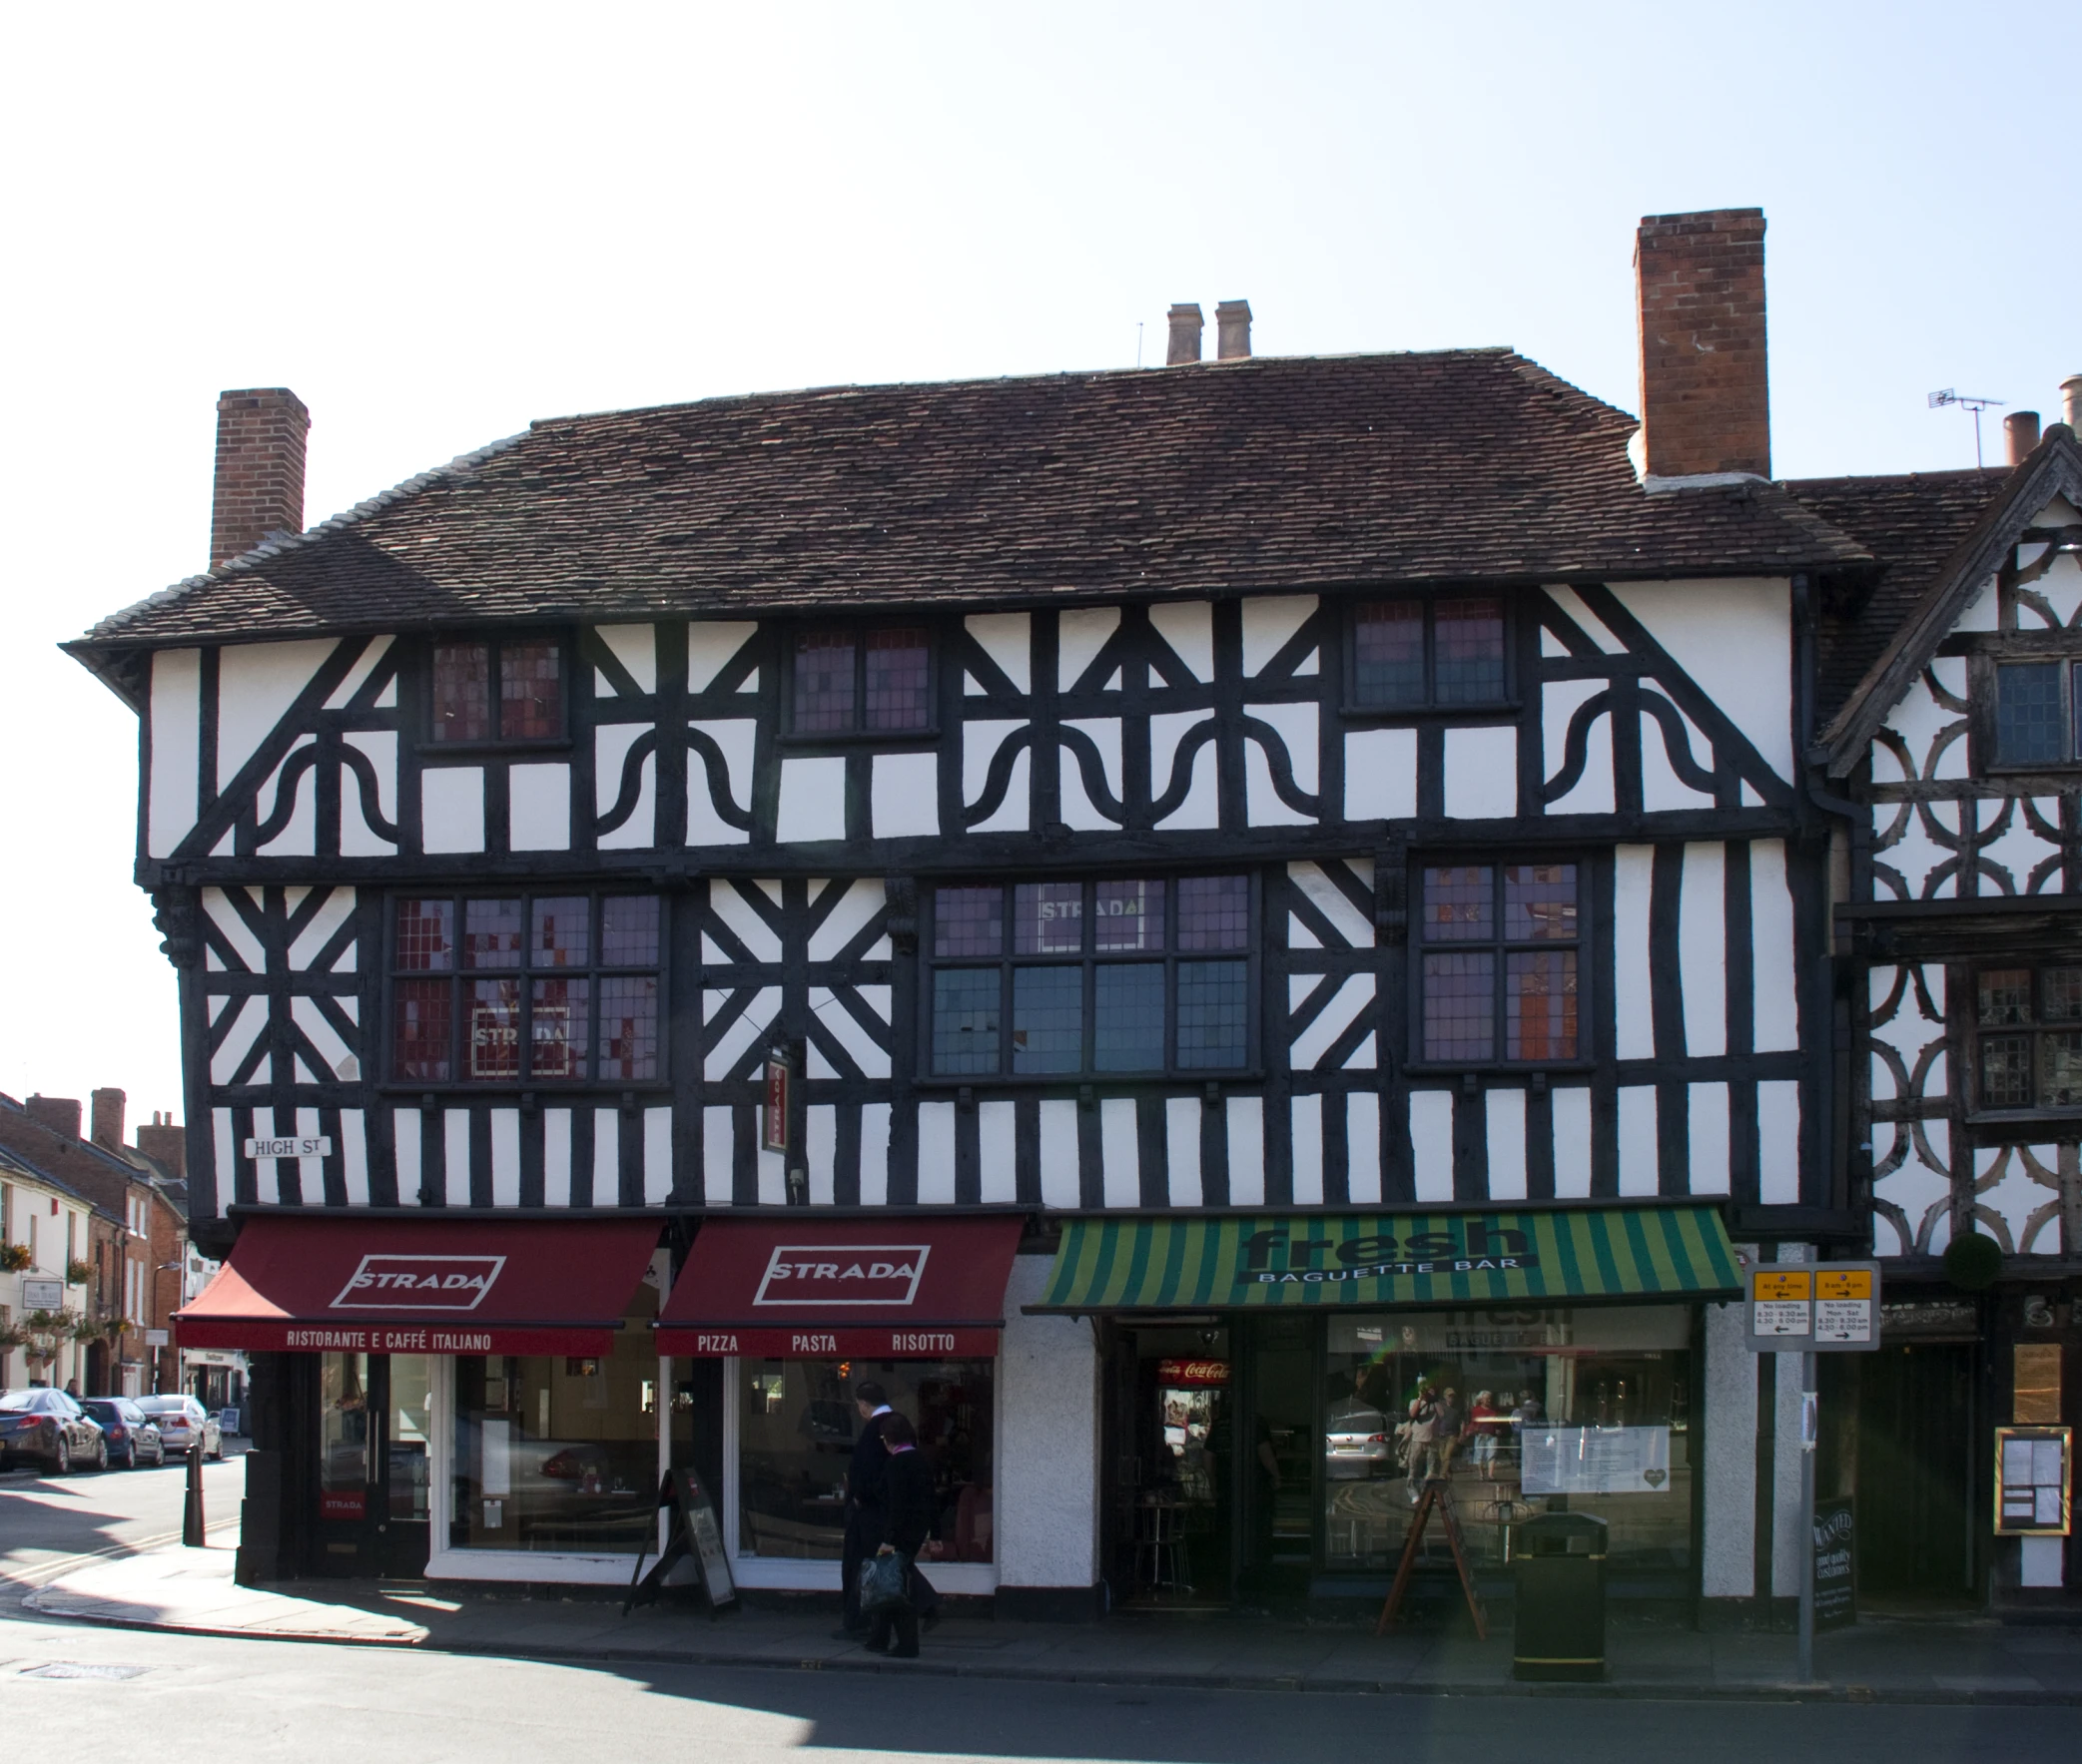 the shop is next to the historic house